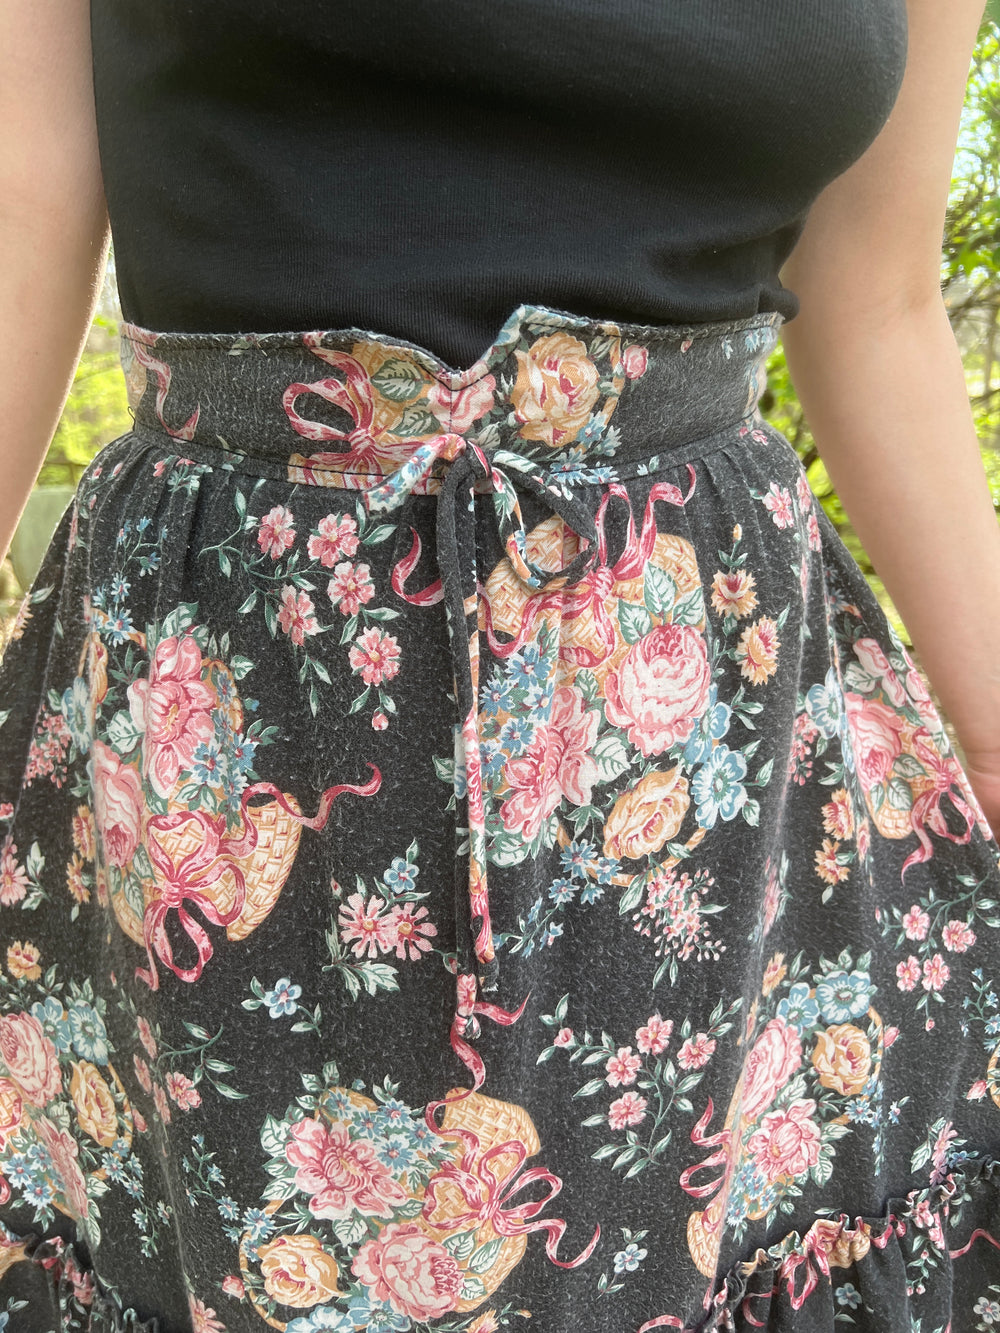 70s Black Pink Floral Cotton Prairie Skirt, Casualaire